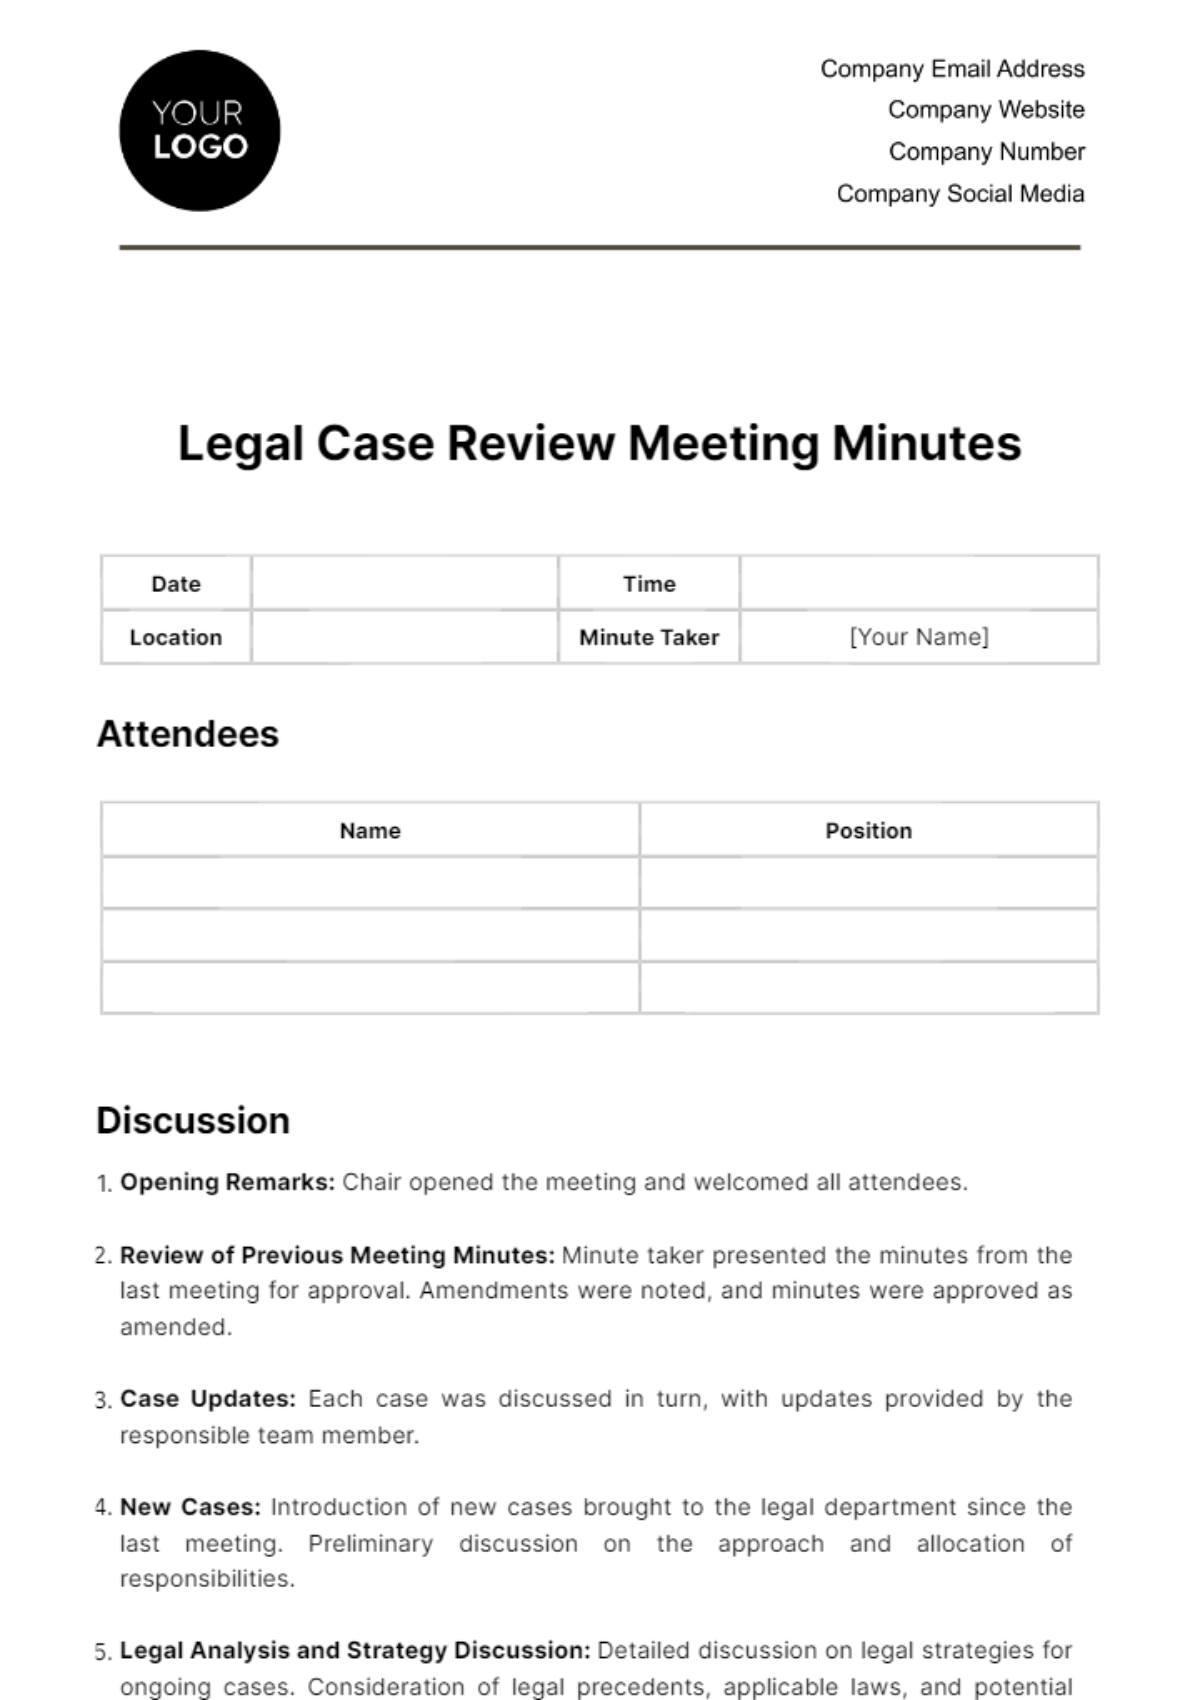 Legal Case Review Meeting Minutes Template